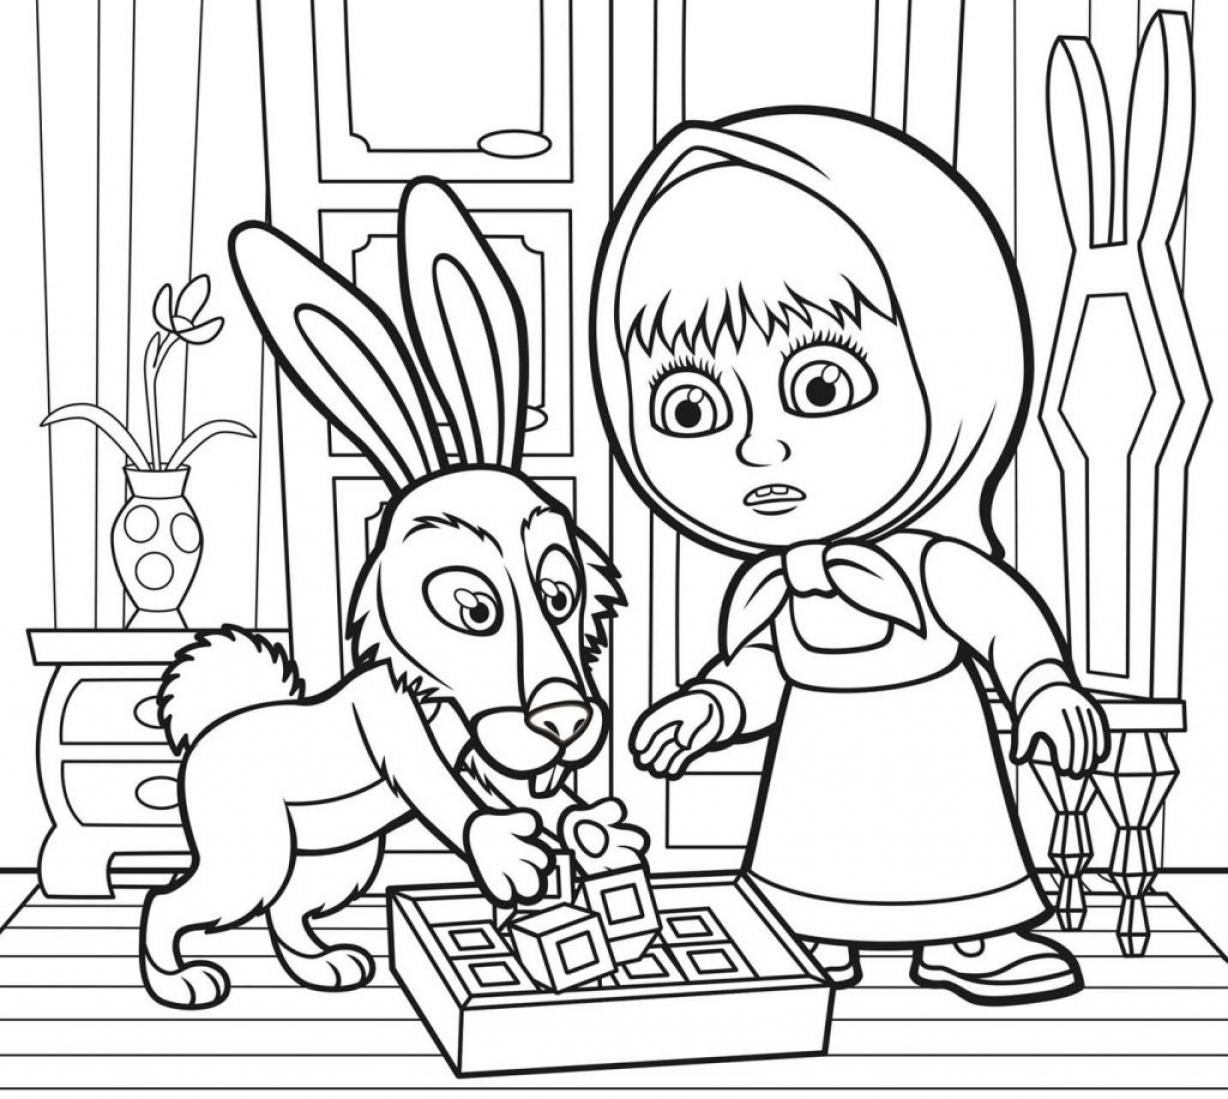 Coloring Pages Masha and the Bear - SheetalColor.com